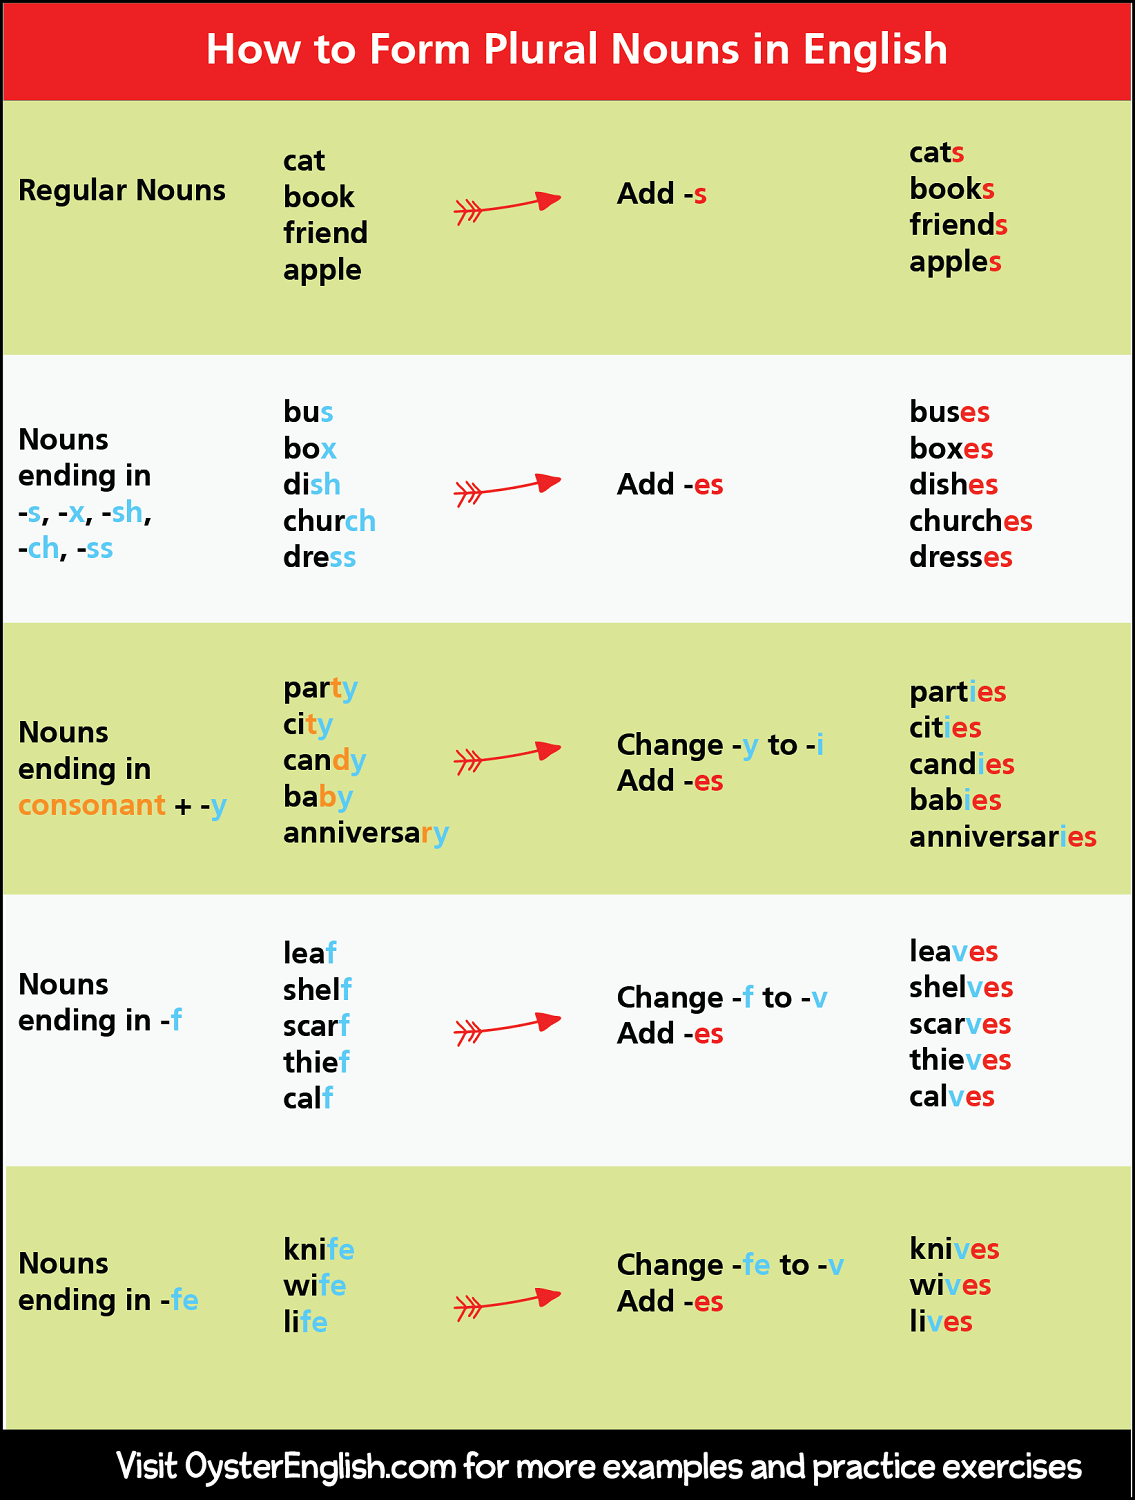 A detailed chart showing how to form plural nouns.